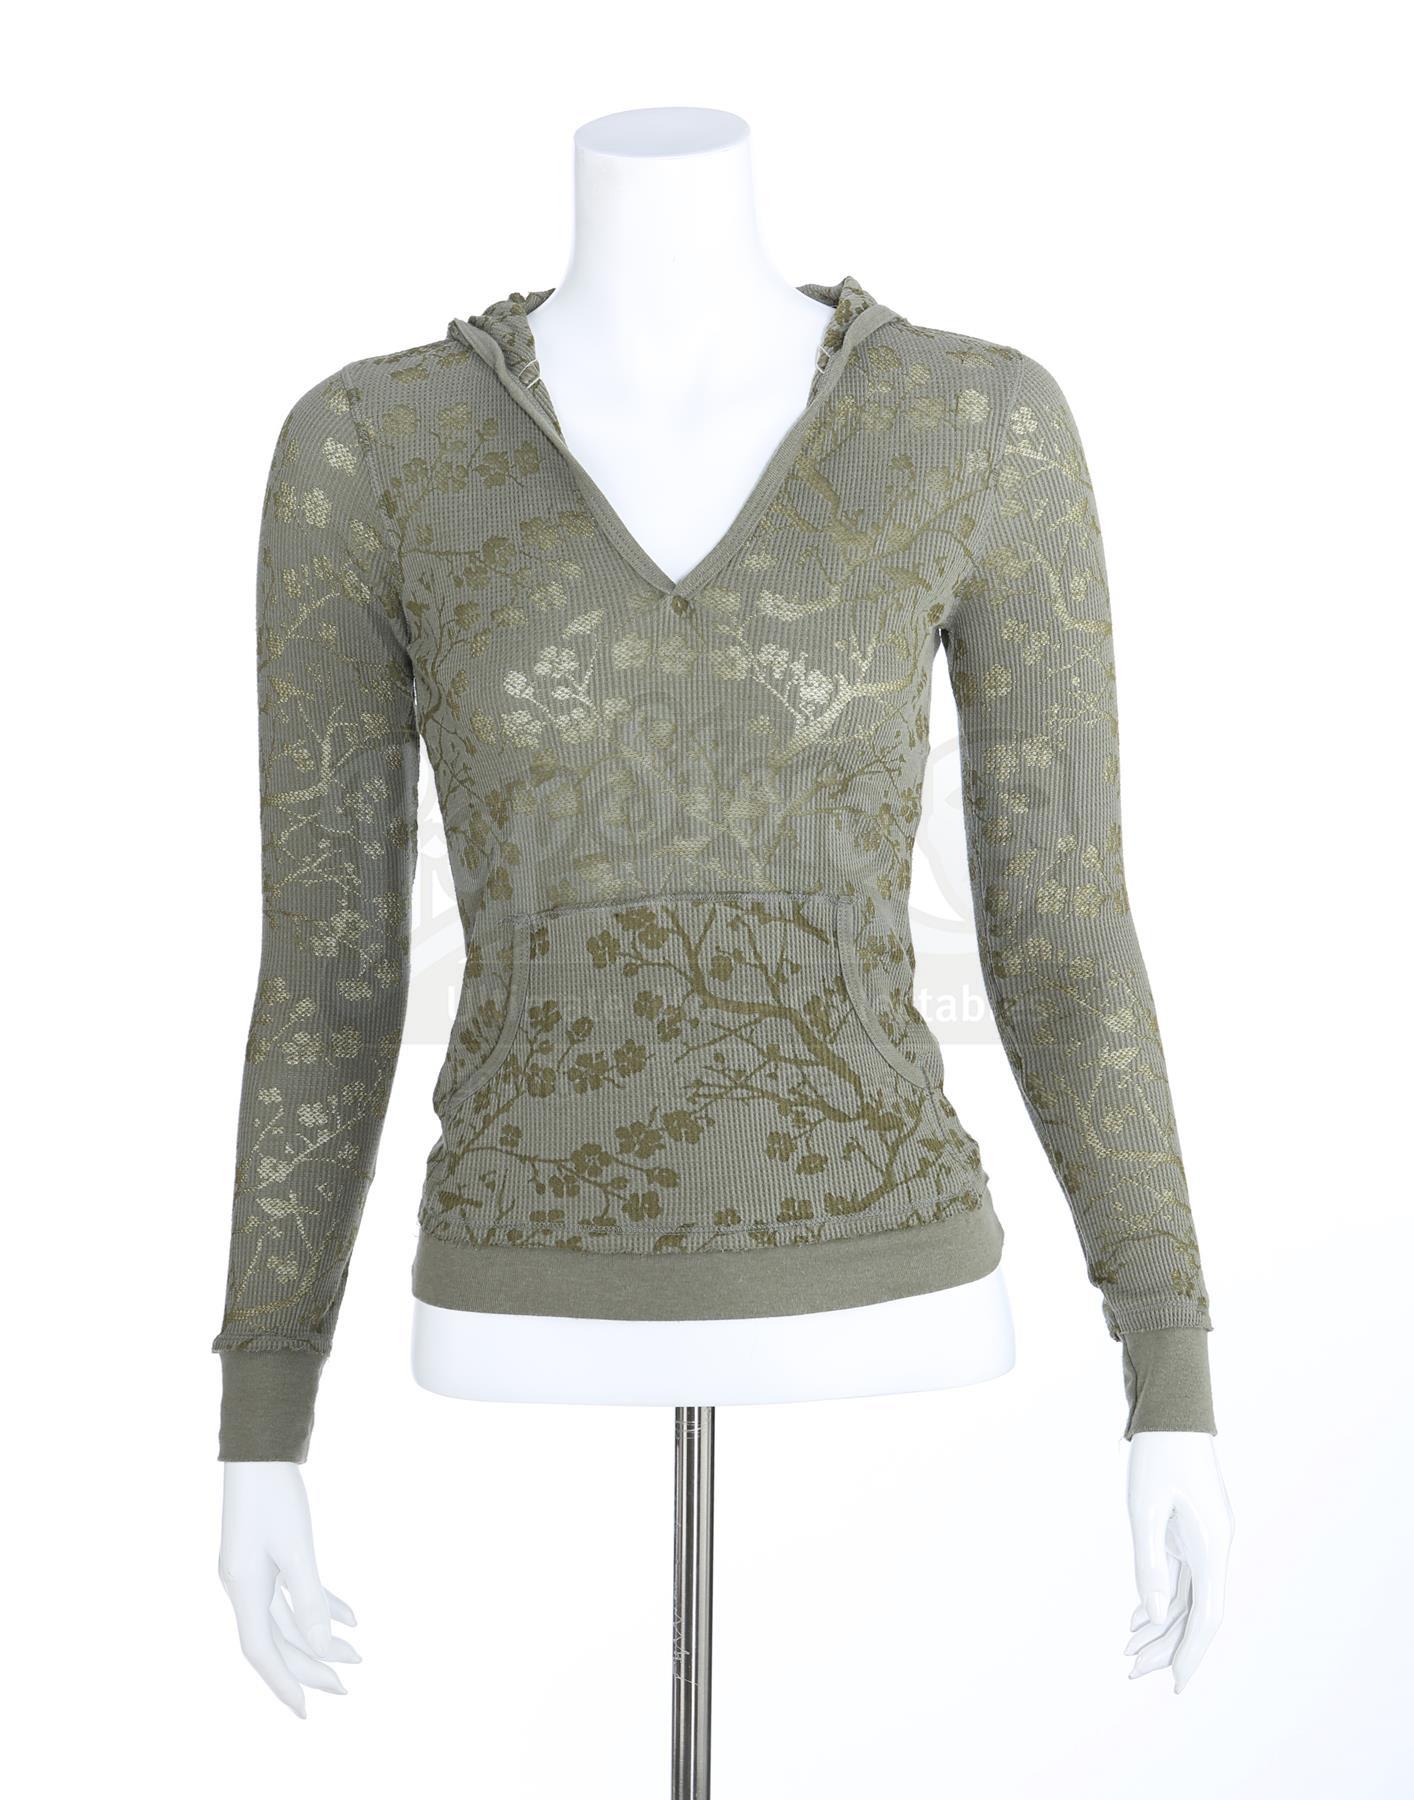 TWILIGHT (2008) - Bella Swan's Green Hooded Thermal - Current price: $1100